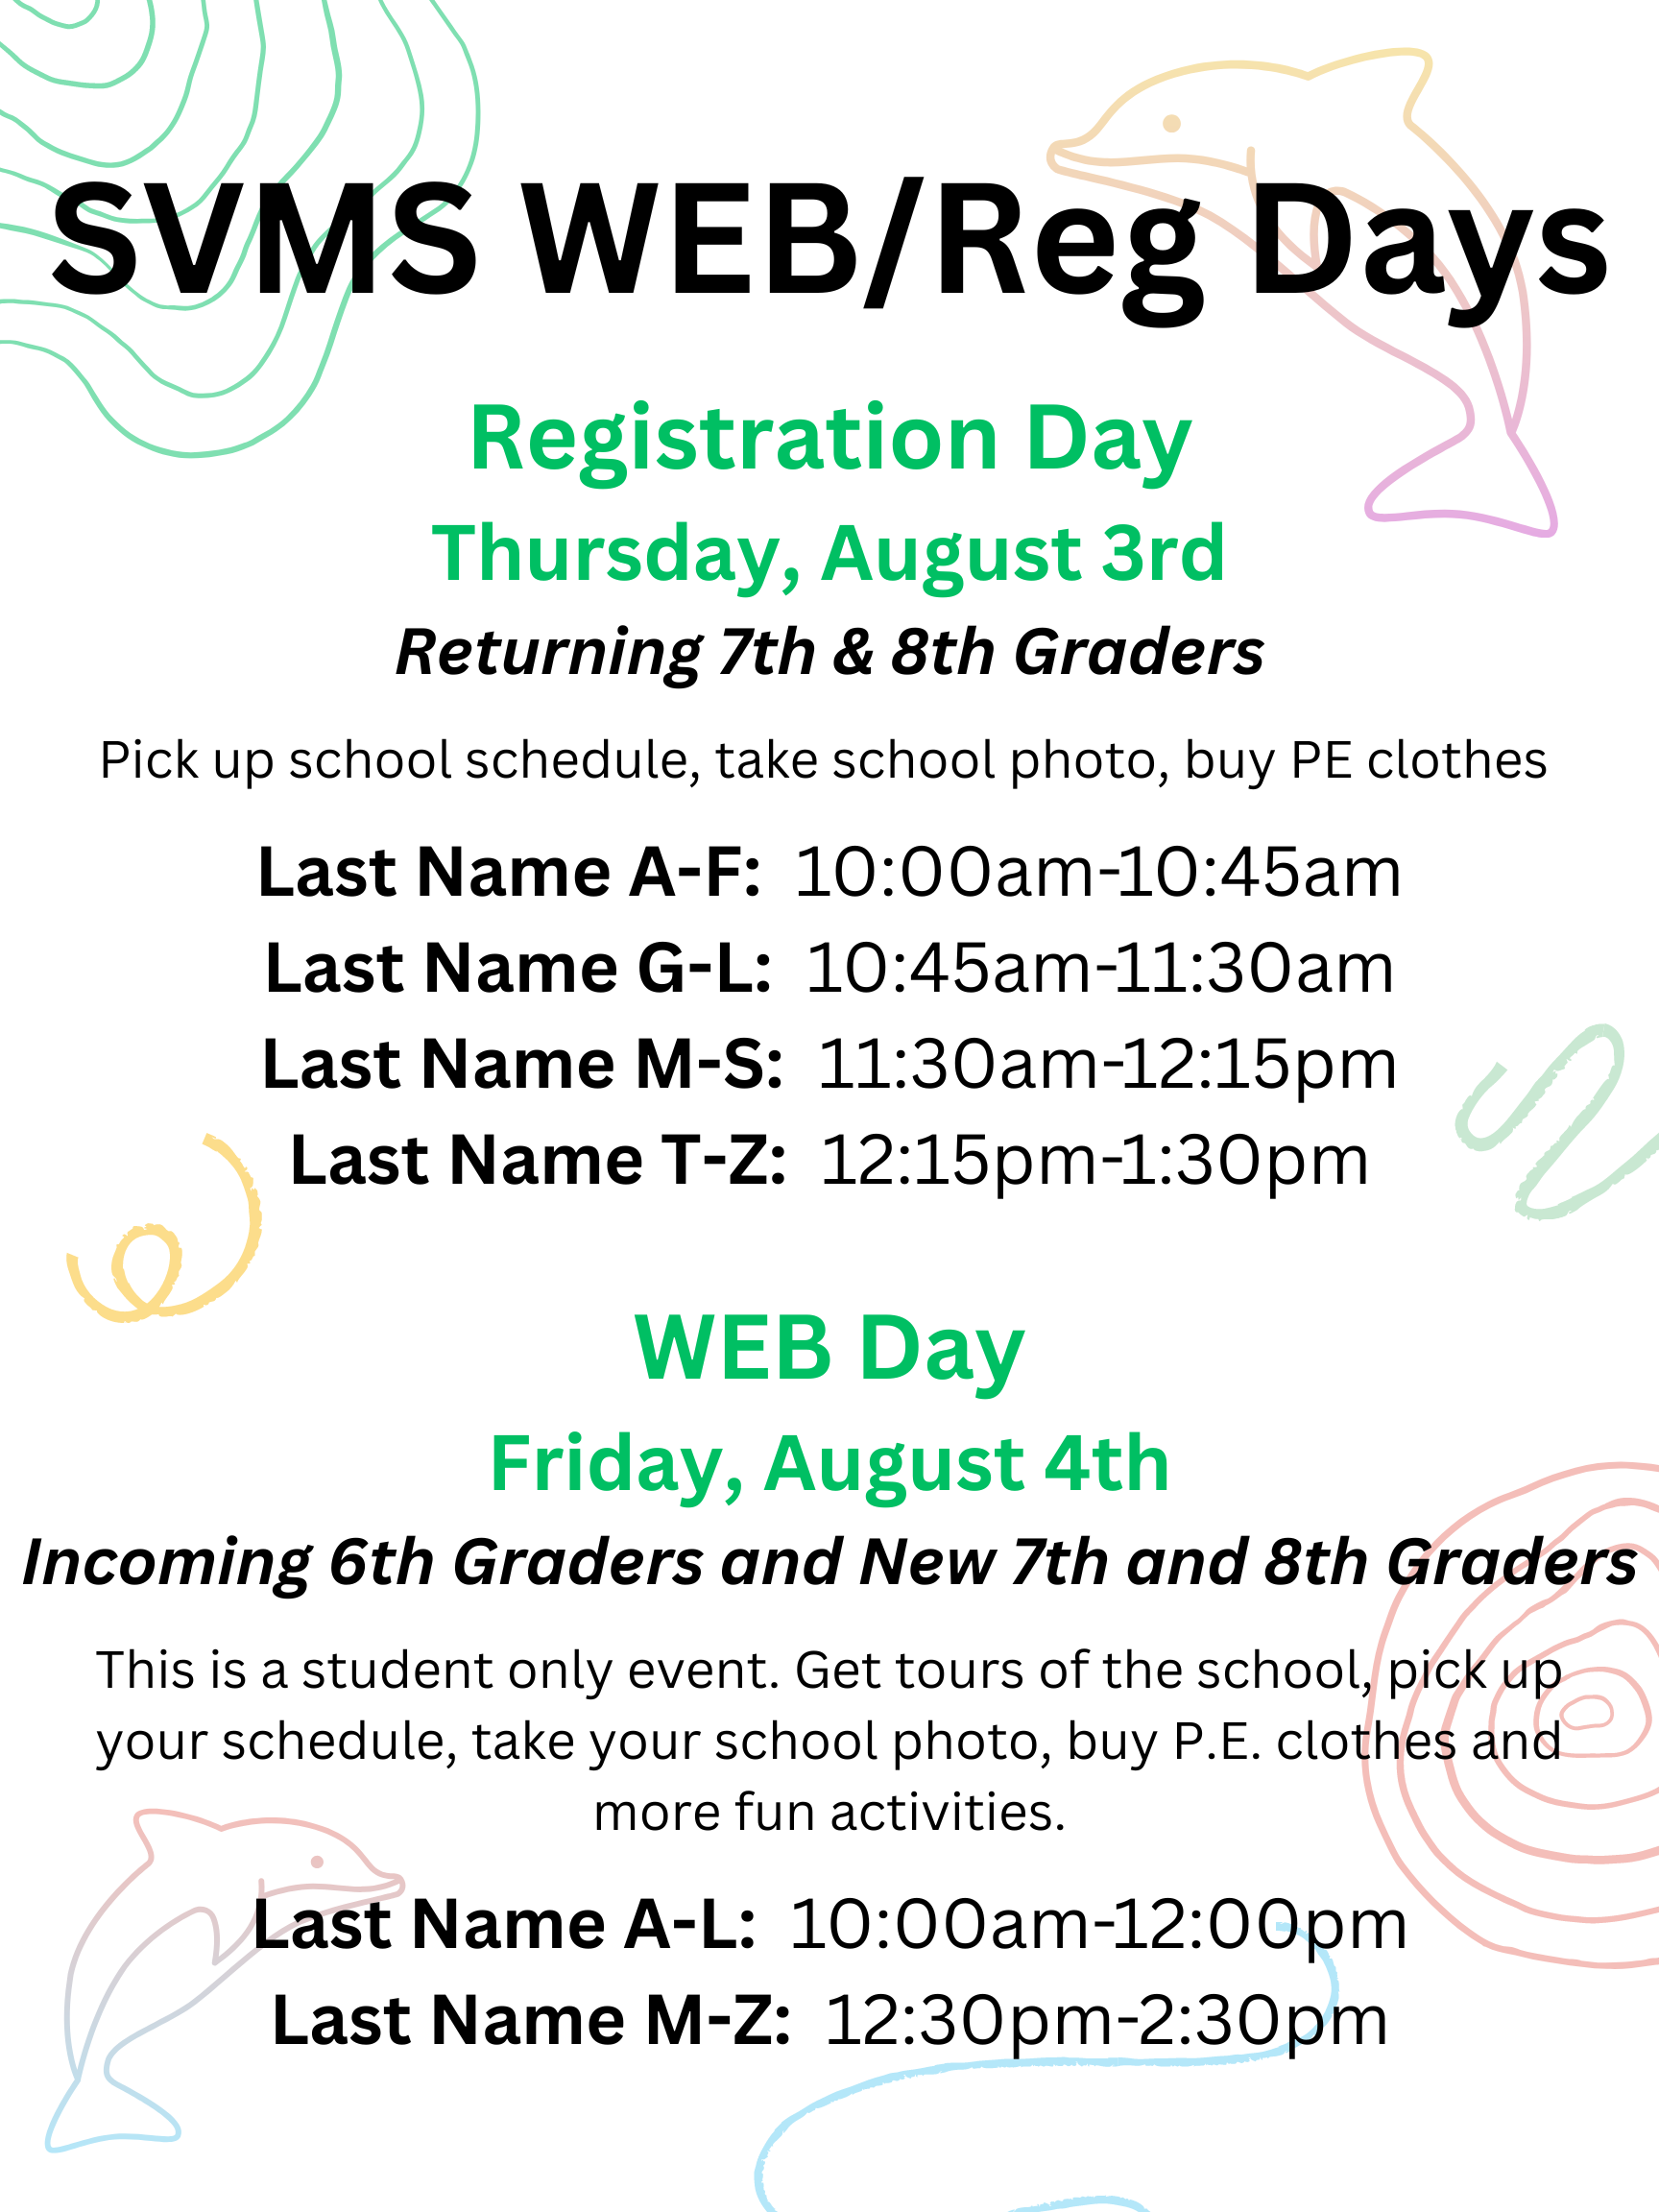 WEB and Registration Days